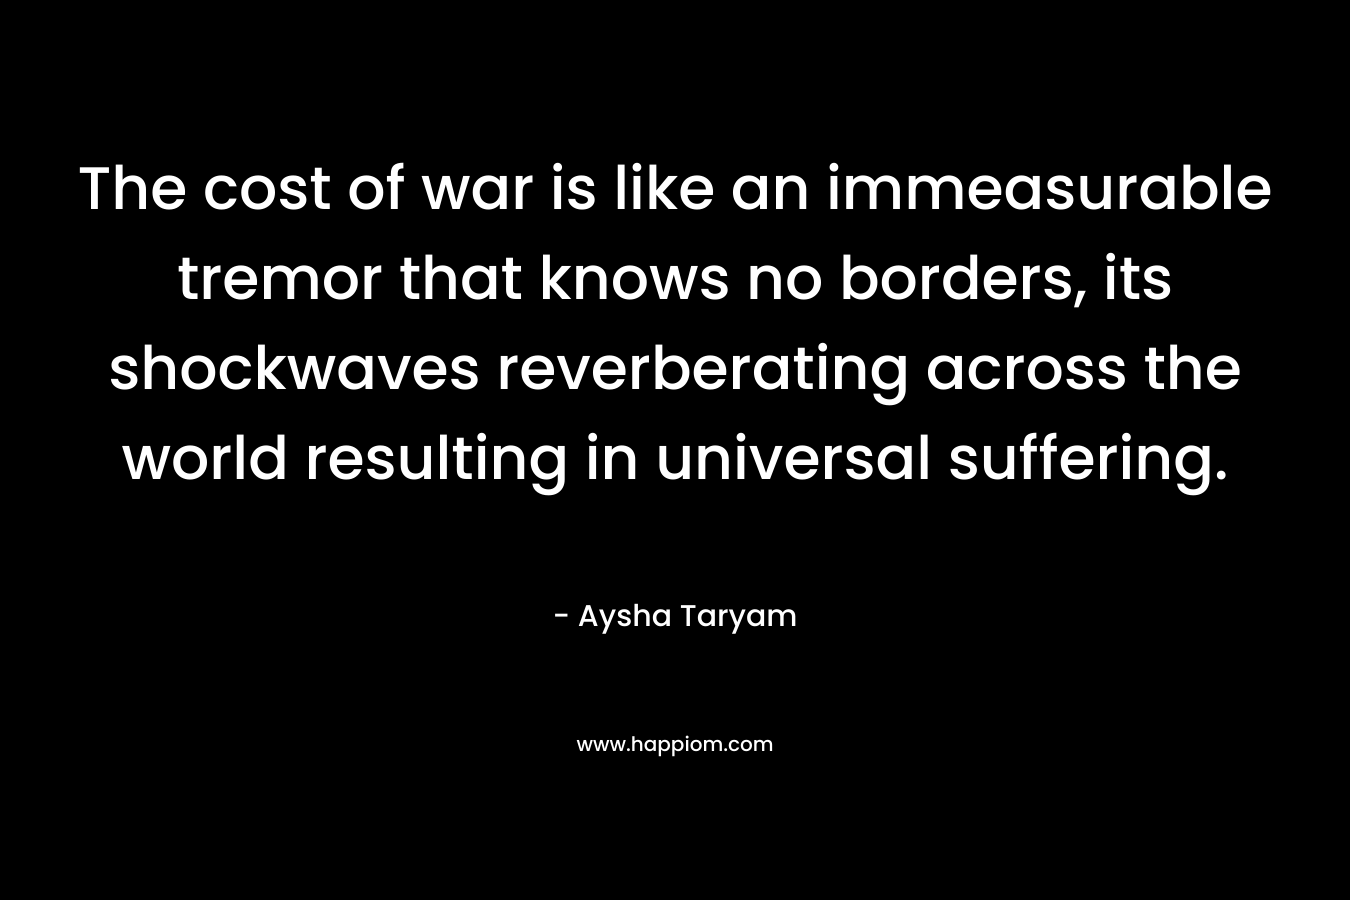 The cost of war is like an immeasurable tremor that knows no borders, its shockwaves reverberating across the world resulting in universal suffering. – Aysha Taryam